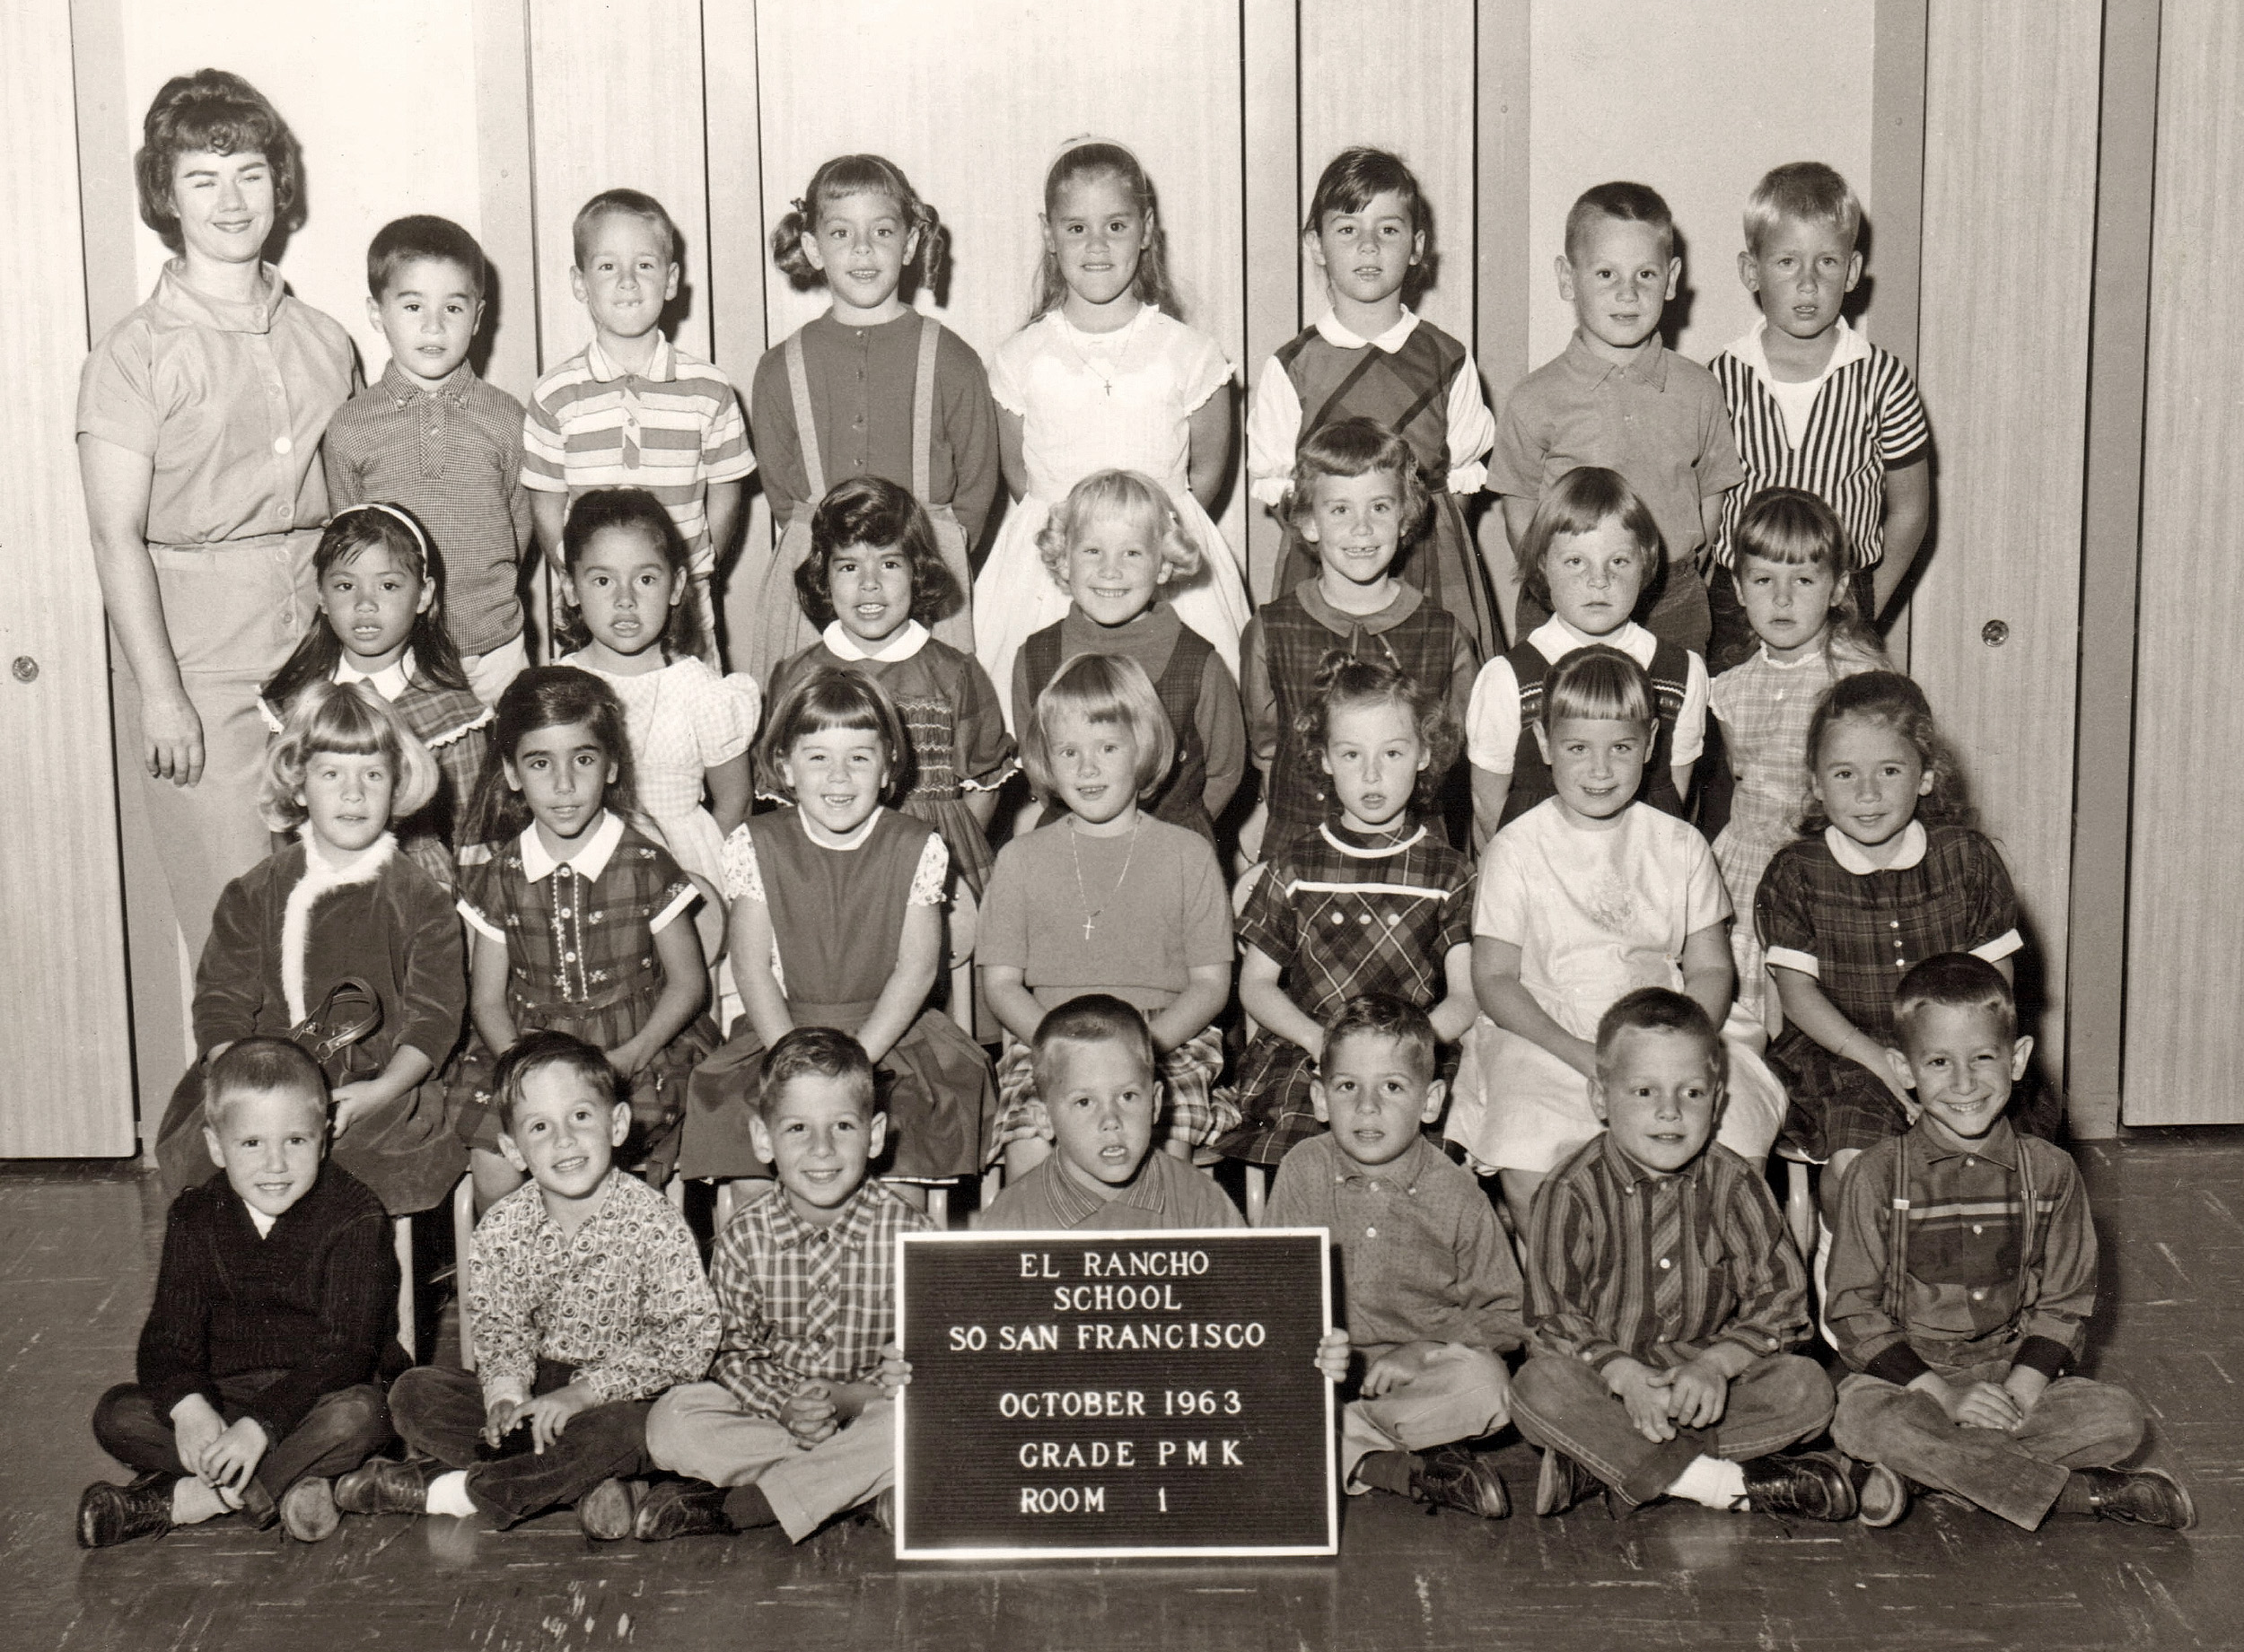 Miss Lorene Swanay's afternoon kindergarten class in California was seemingly a very happy group, with a few glum exceptions. I'm the befuddled lad holding the sign and flanked by the Tipton Twins. It's chilling to read the date on it; one month later the nation suffered a tragedy we were too young to understand. View full size.